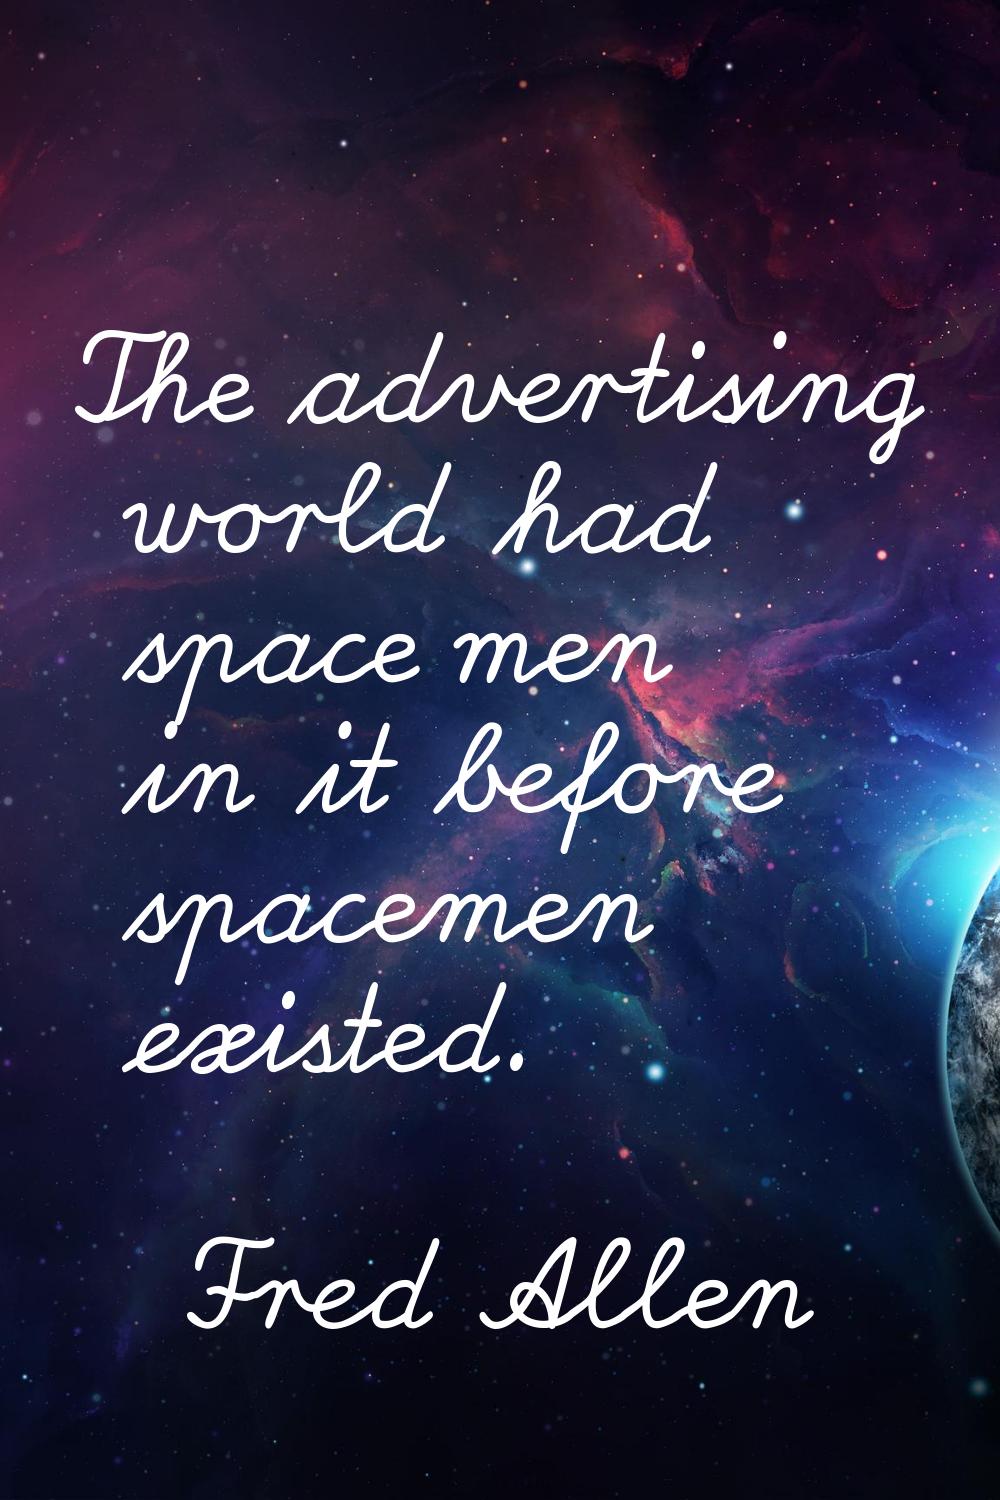 The advertising world had space men in it before spacemen existed.